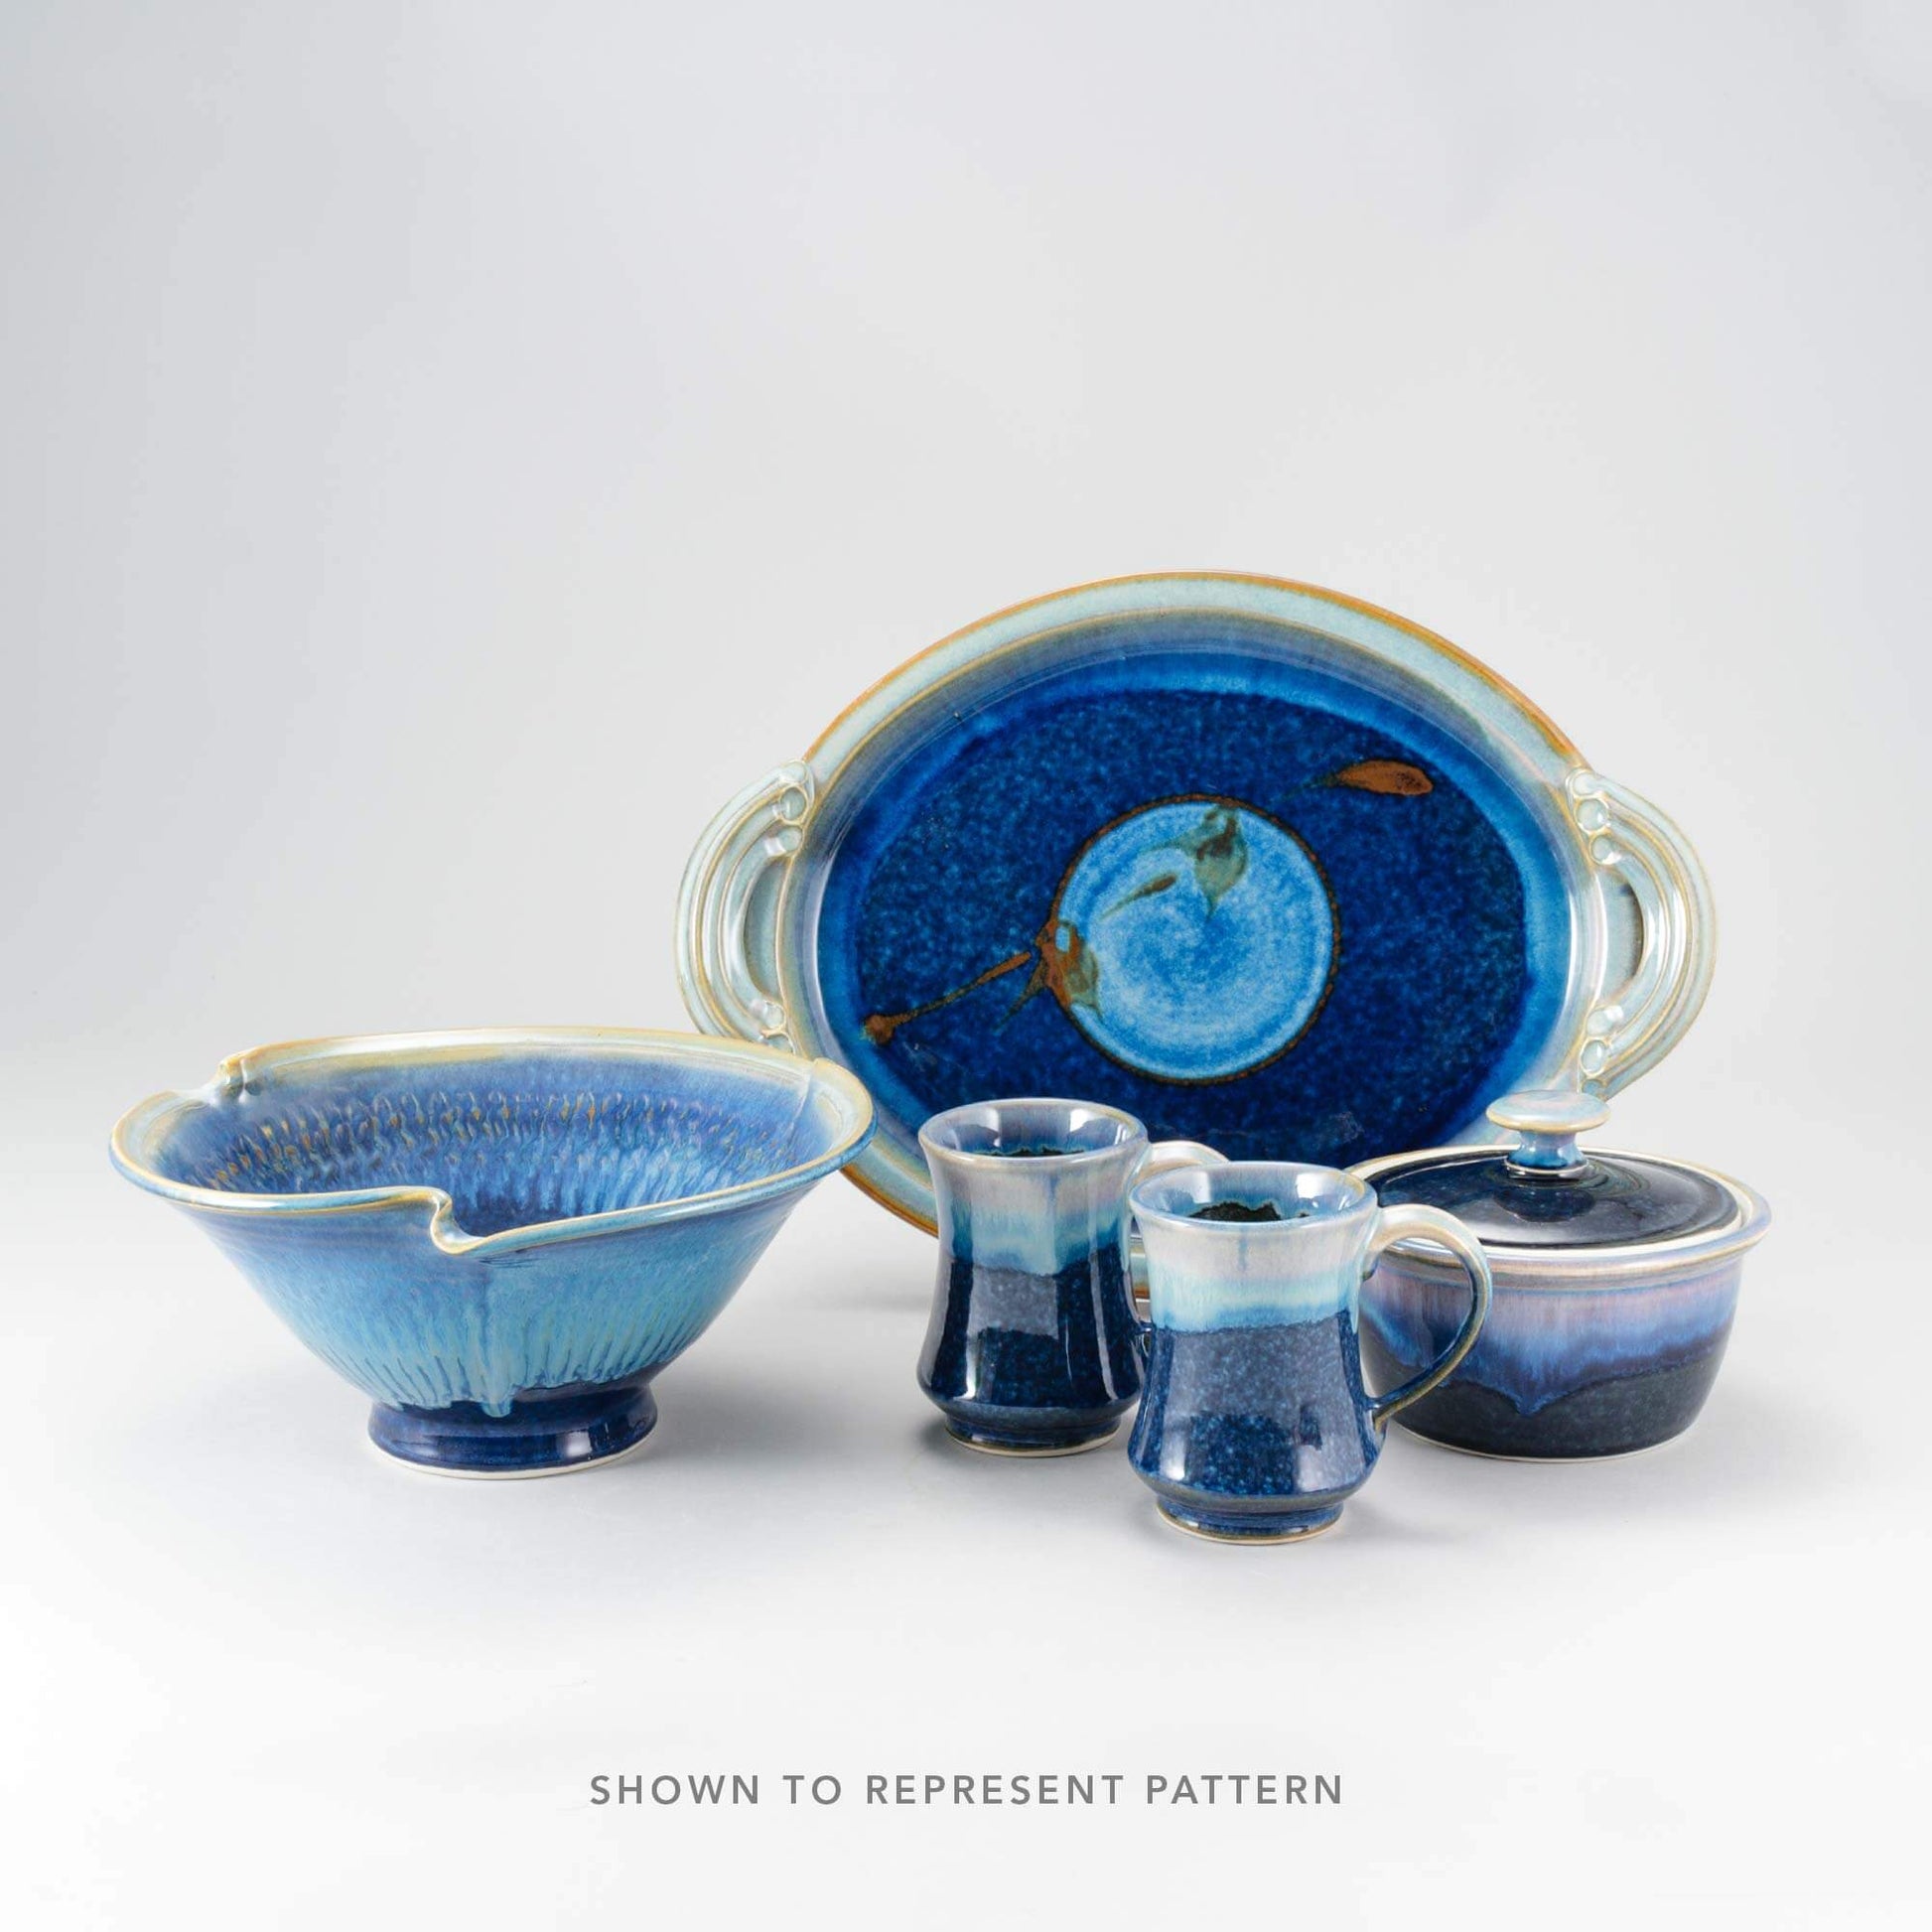 Handmade Pottery in Cobalt pattern made by Georgetown Pottery in Maine